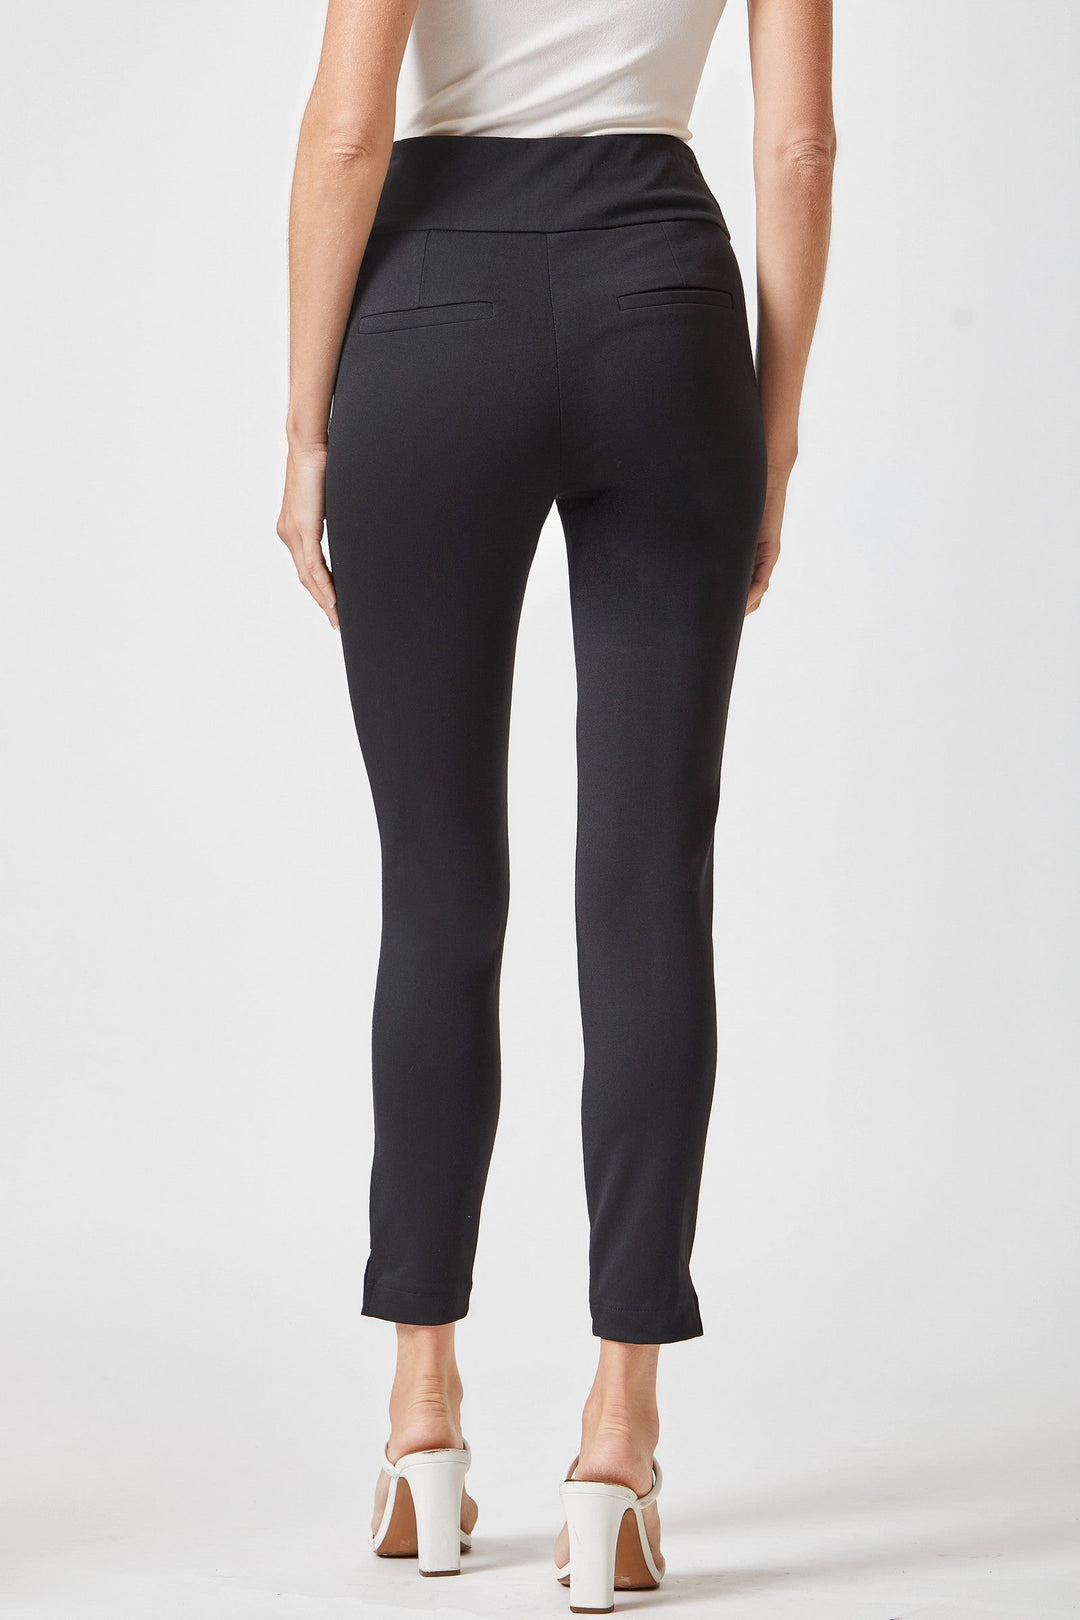 Magic Skinny Pants in Twelve Colors-Pants-Inspired by Justeen-Women's Clothing Boutique in Chicago, Illinois